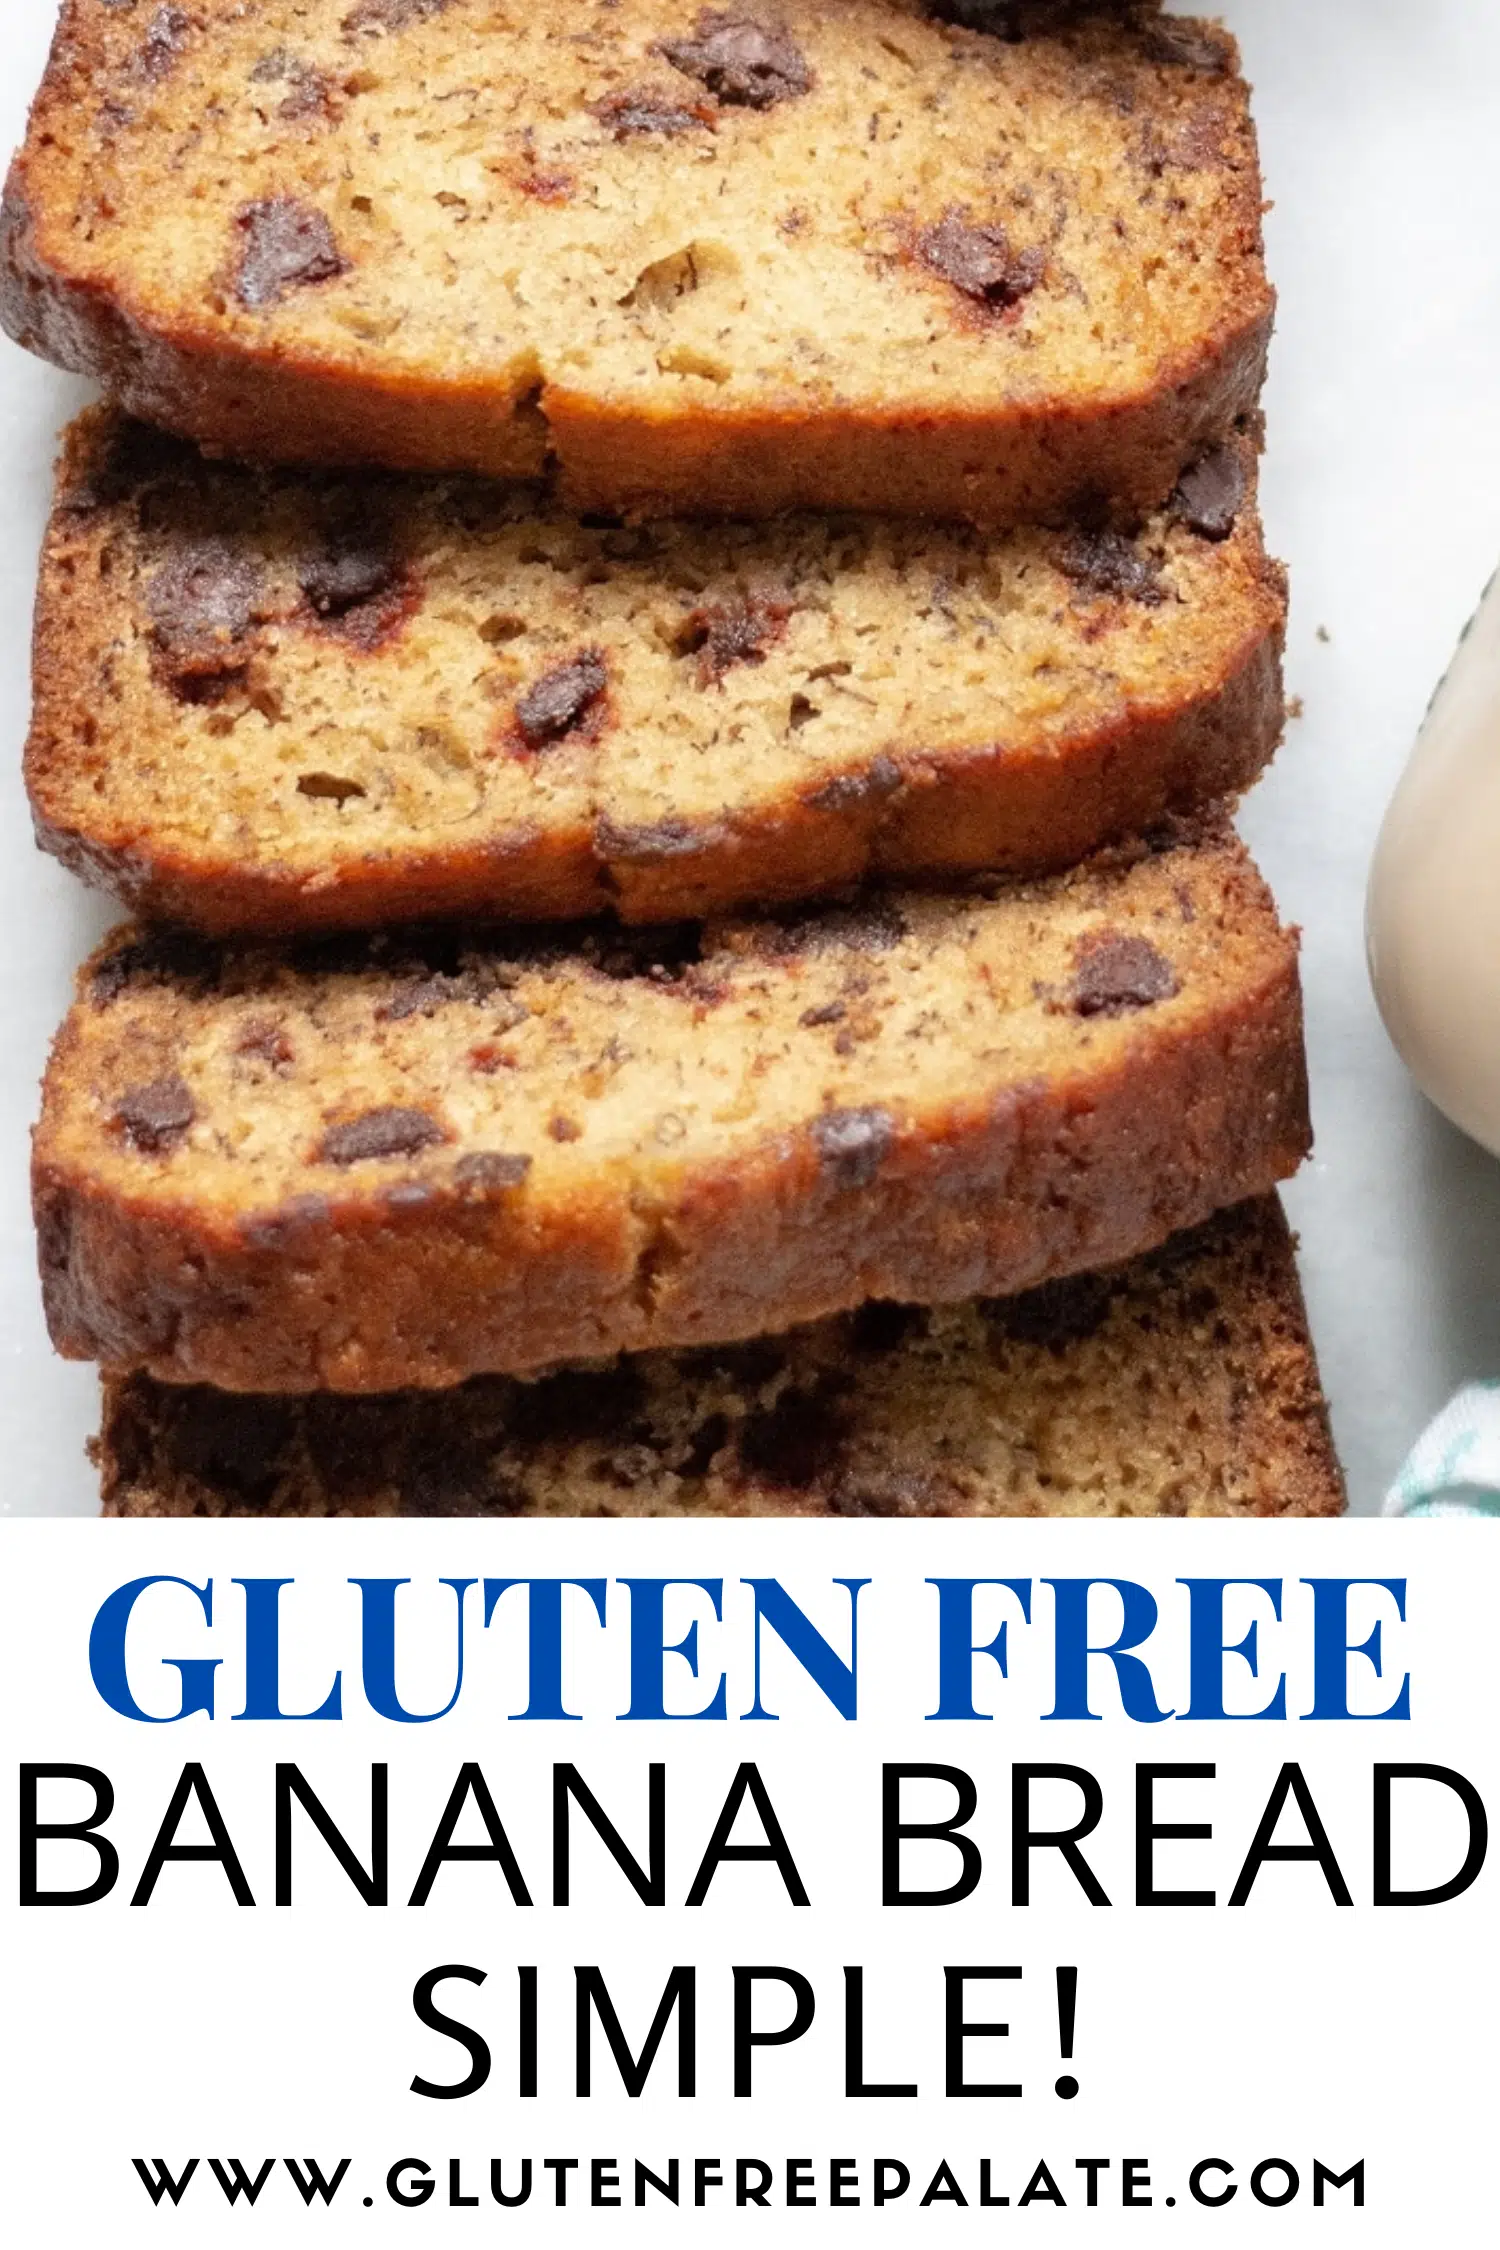 slices of gluten-free banana bread with chocolate chips, with text overlay